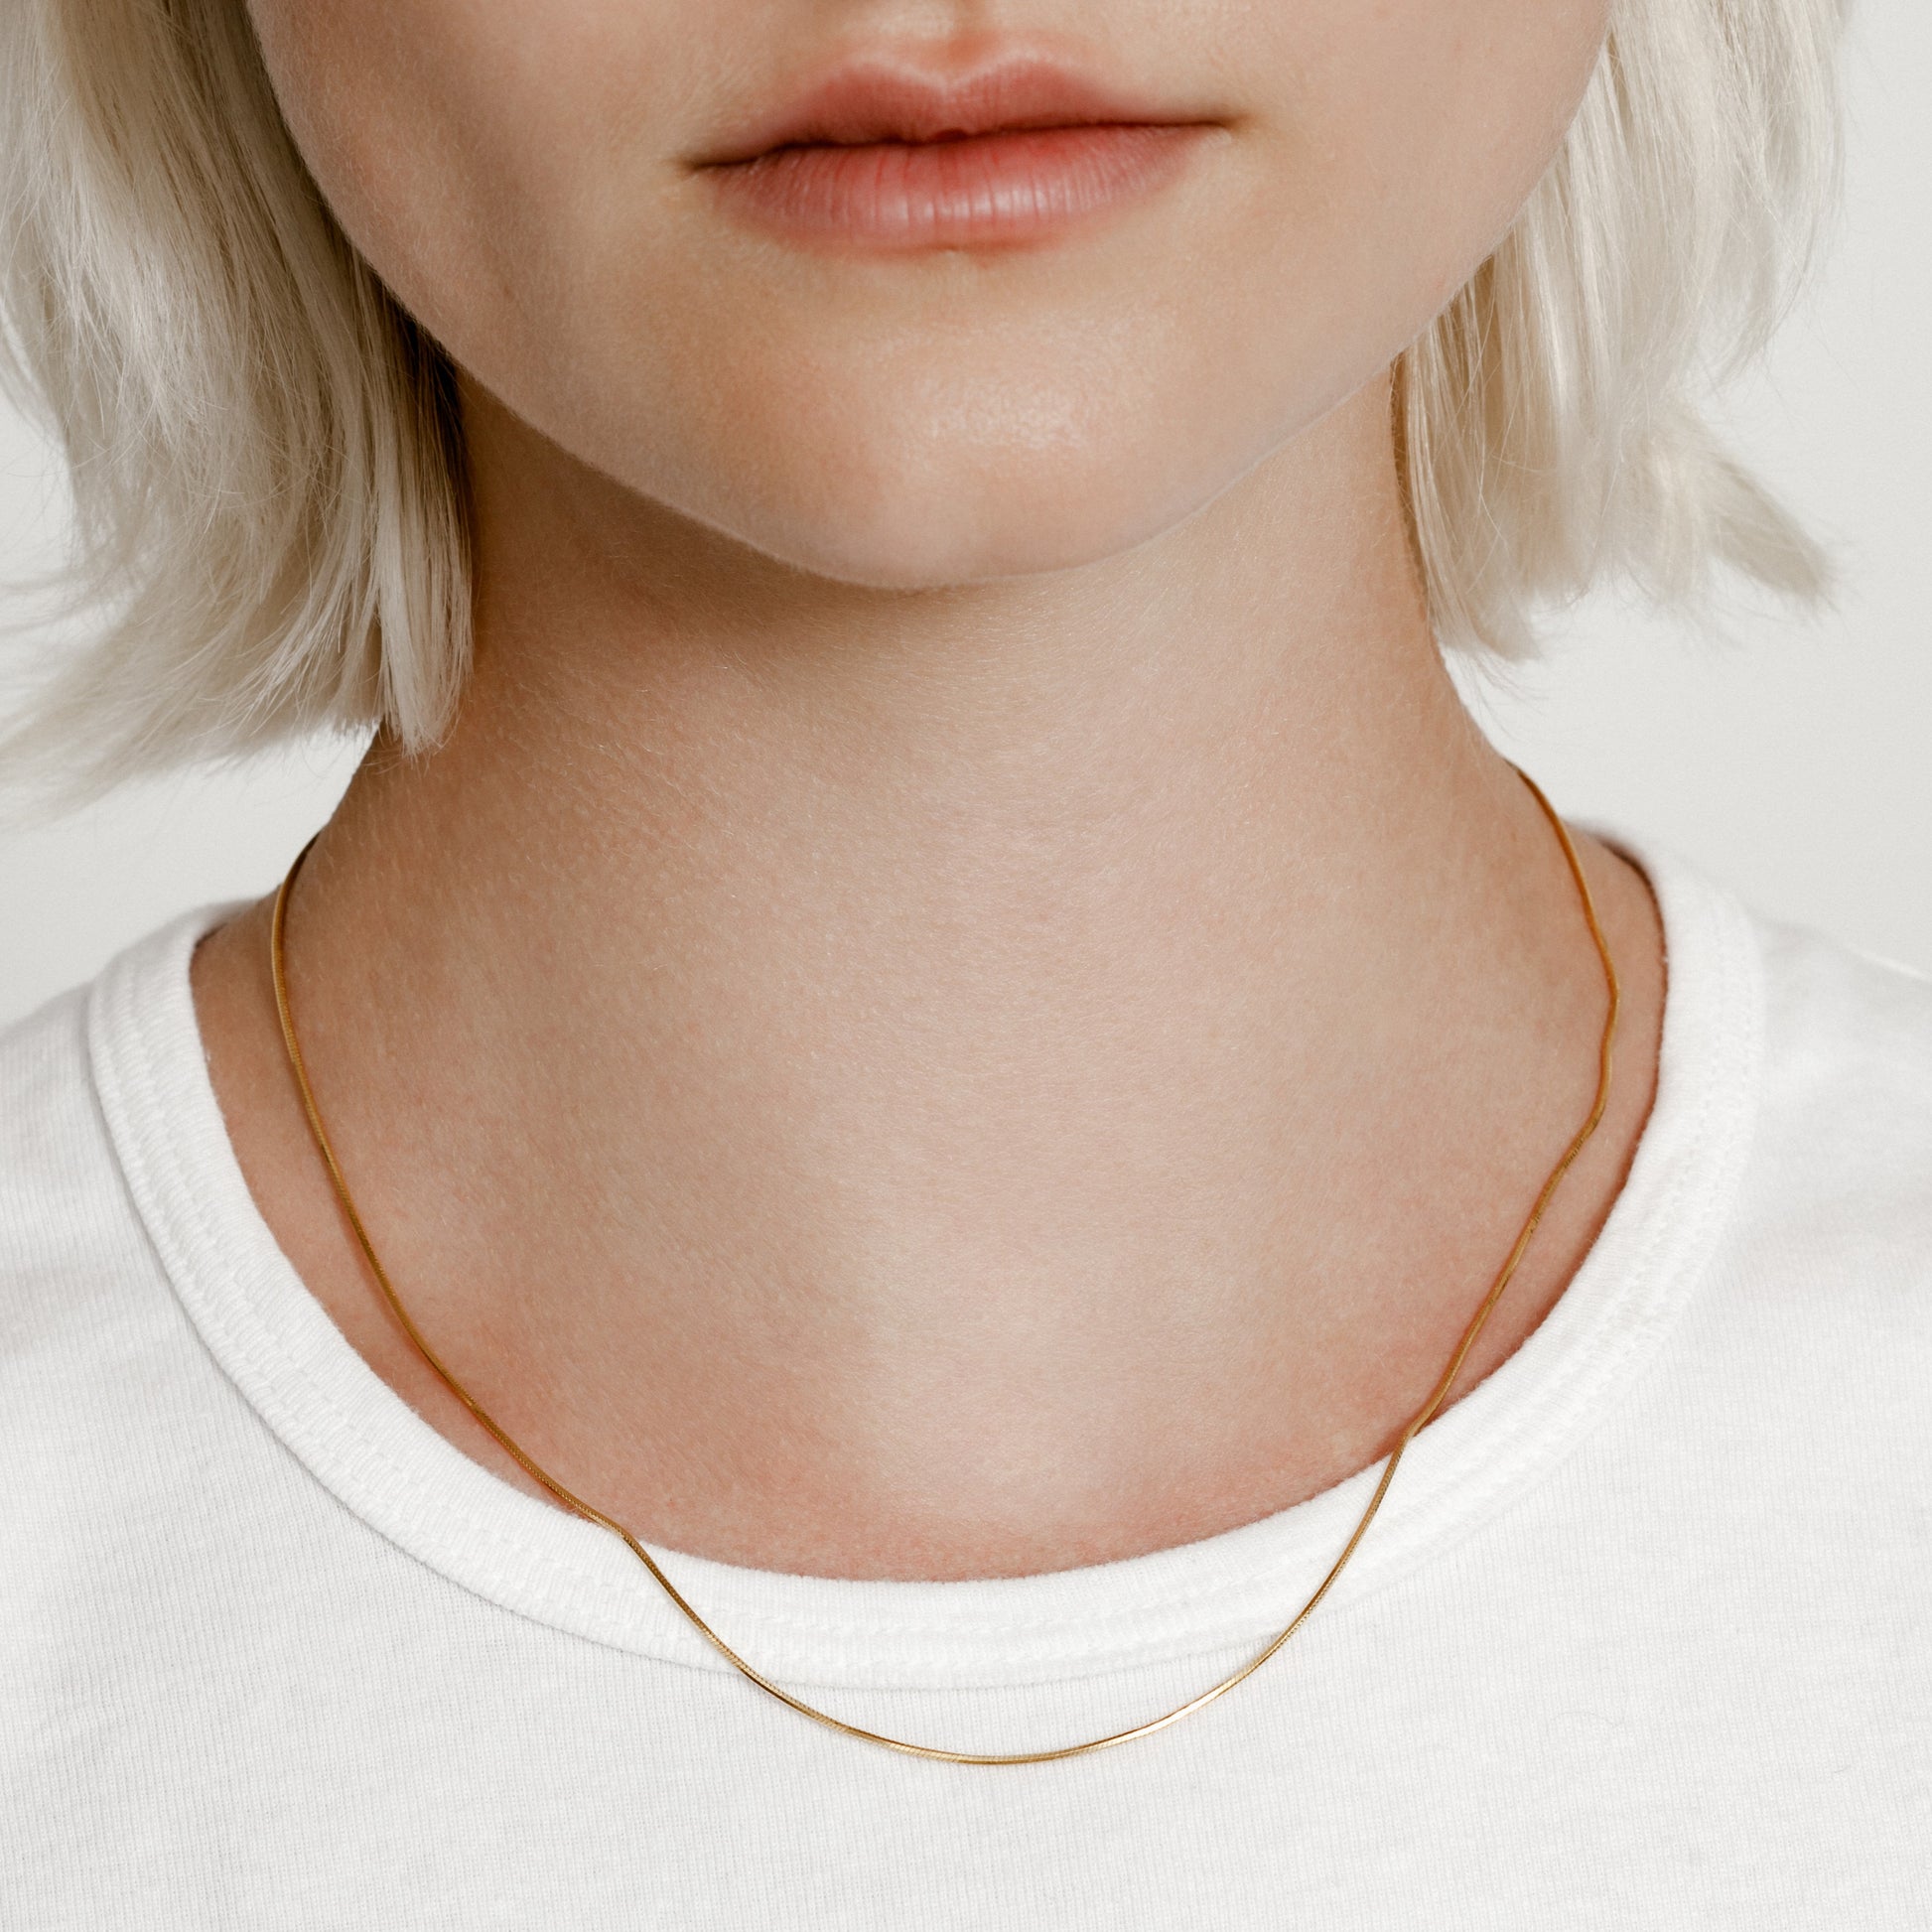 An everyday gold snake style chain Sylvie necklace by Wolf Circus.